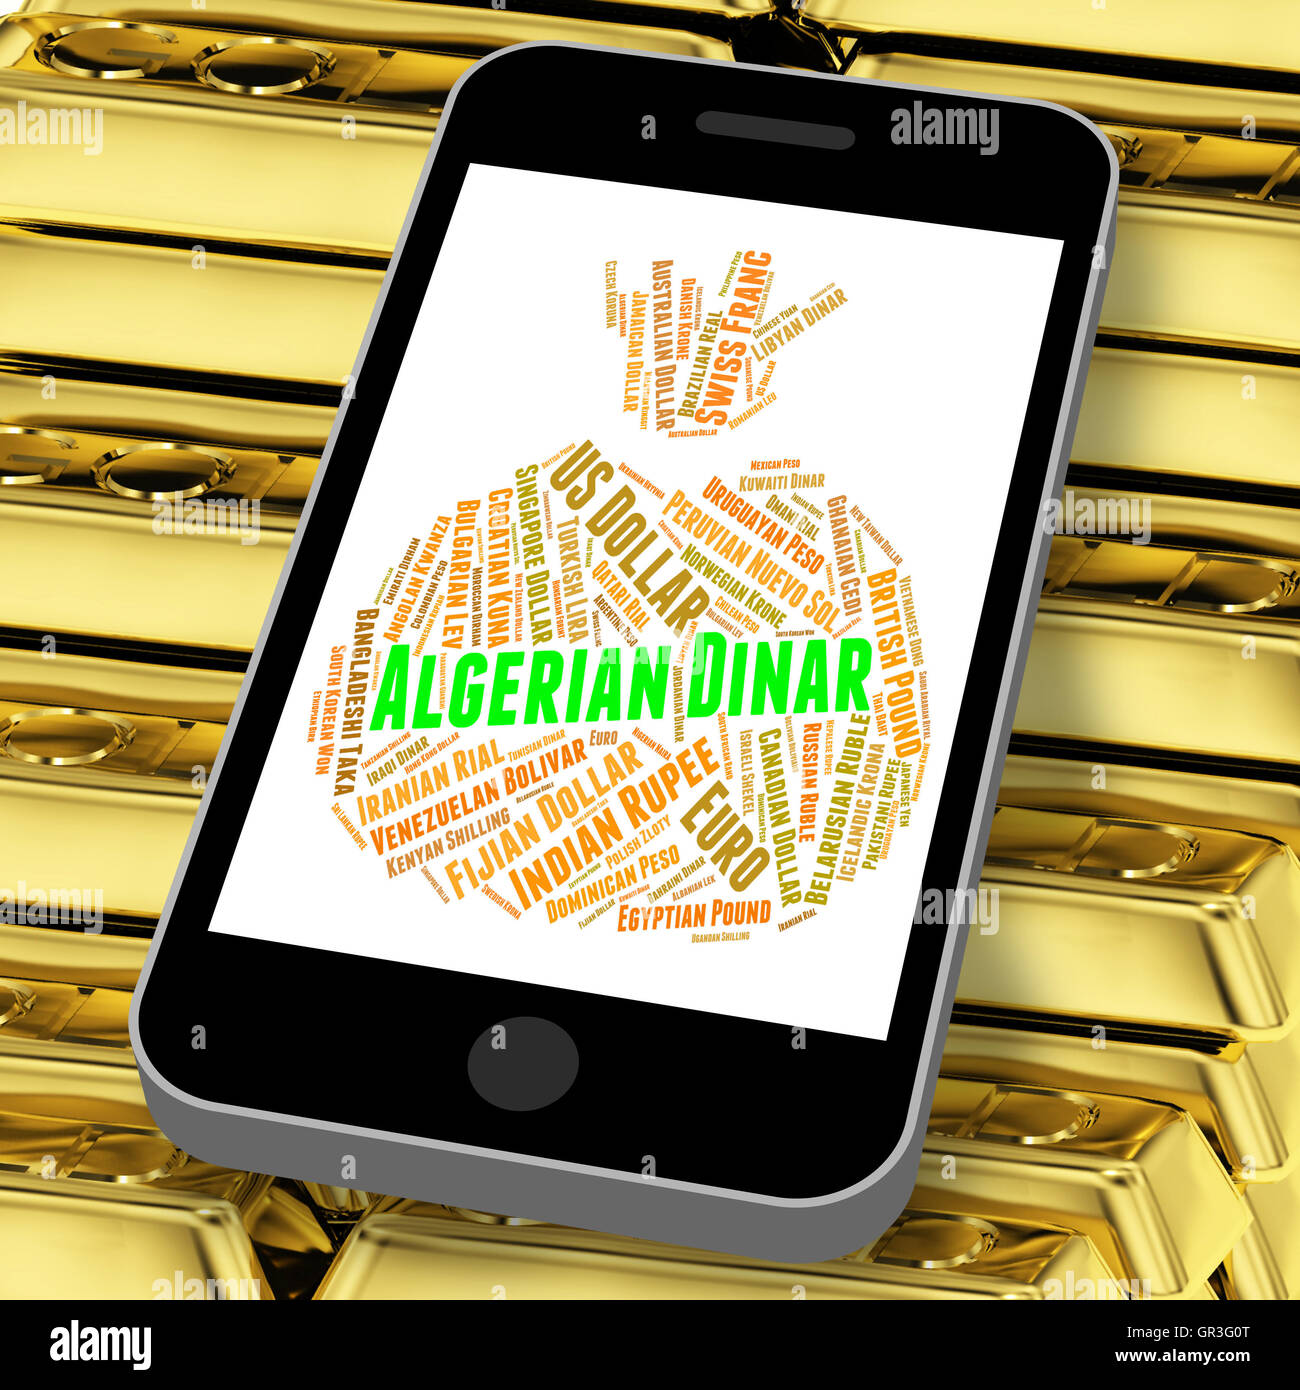 Algerian Dinar Meaning!    Currency Exchange And Dinars Stock Photo - 